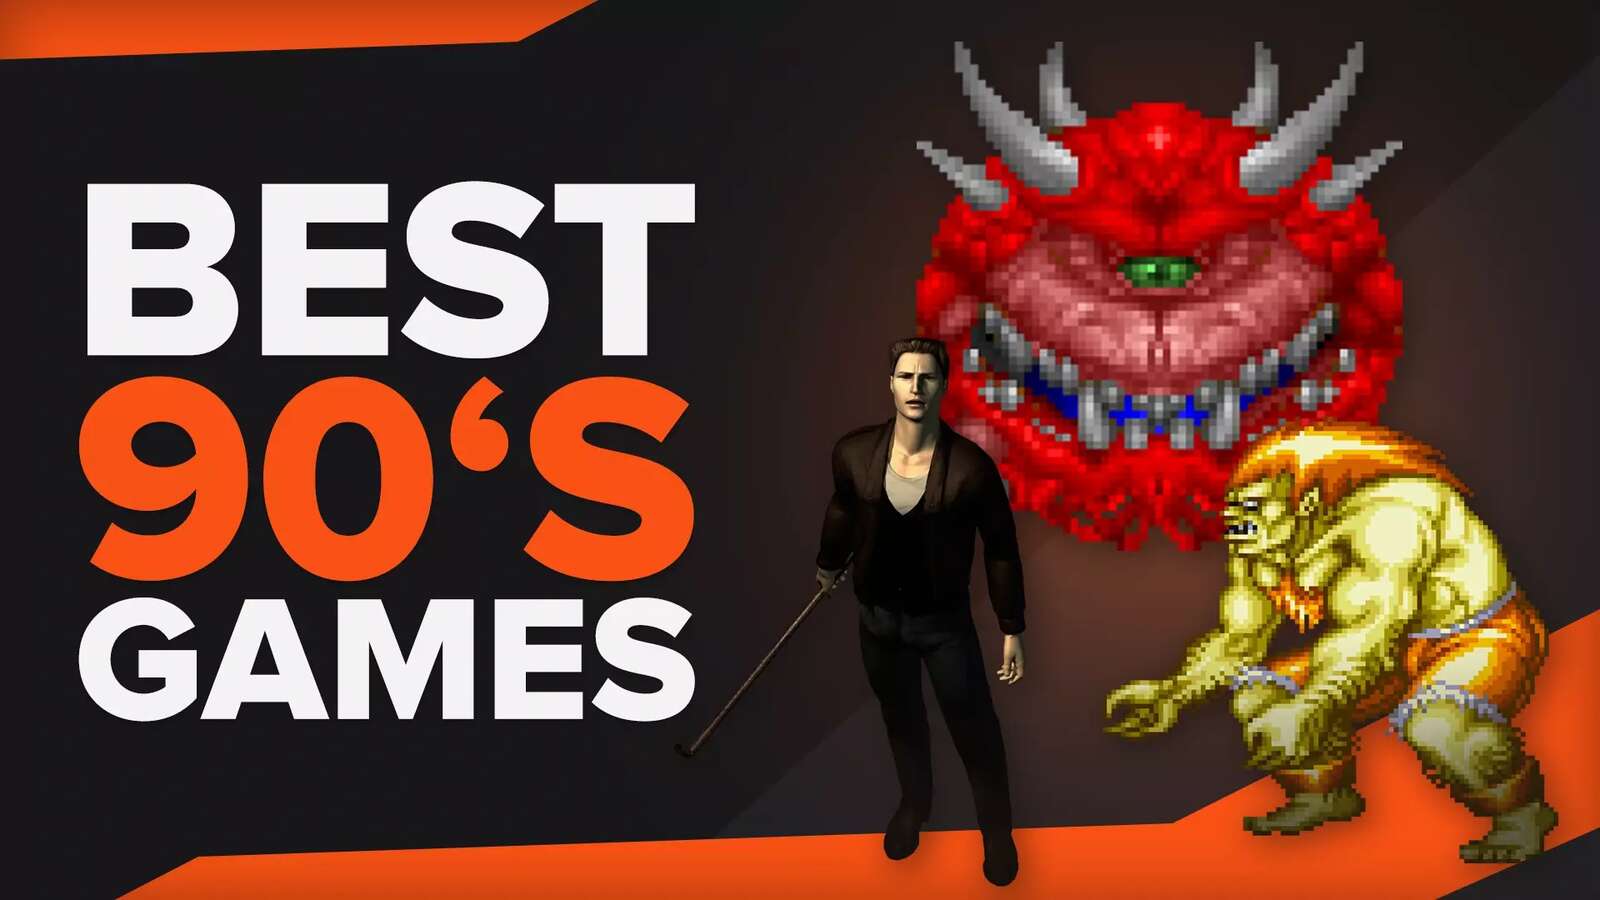 The Top 10 Best 90s Games Ranked [Real Gems]